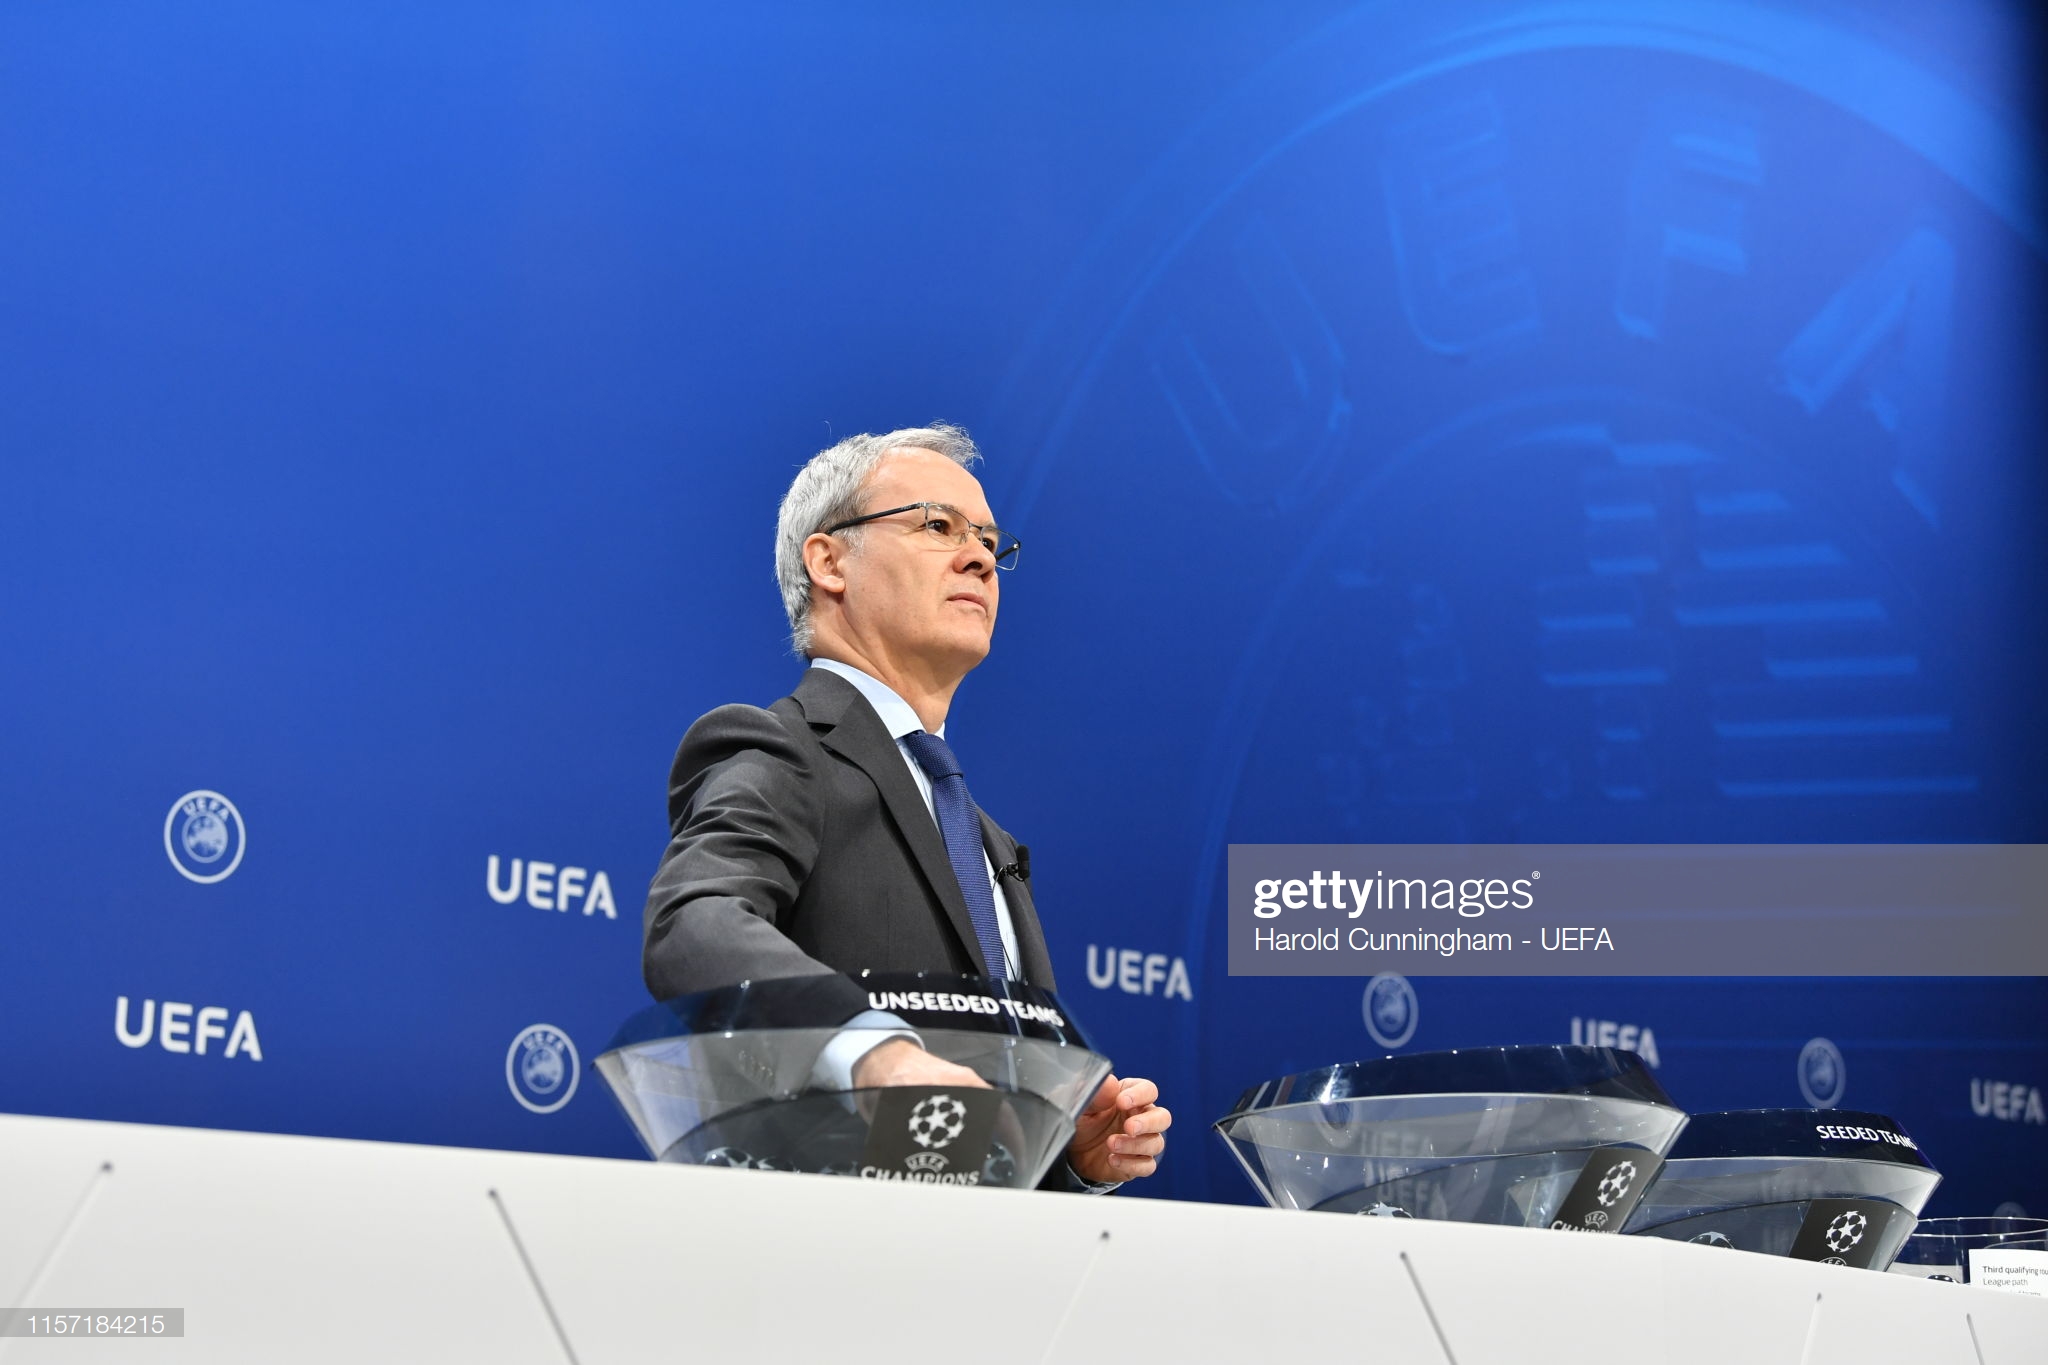 gettyimages-1157184215-2048x2048.jpg